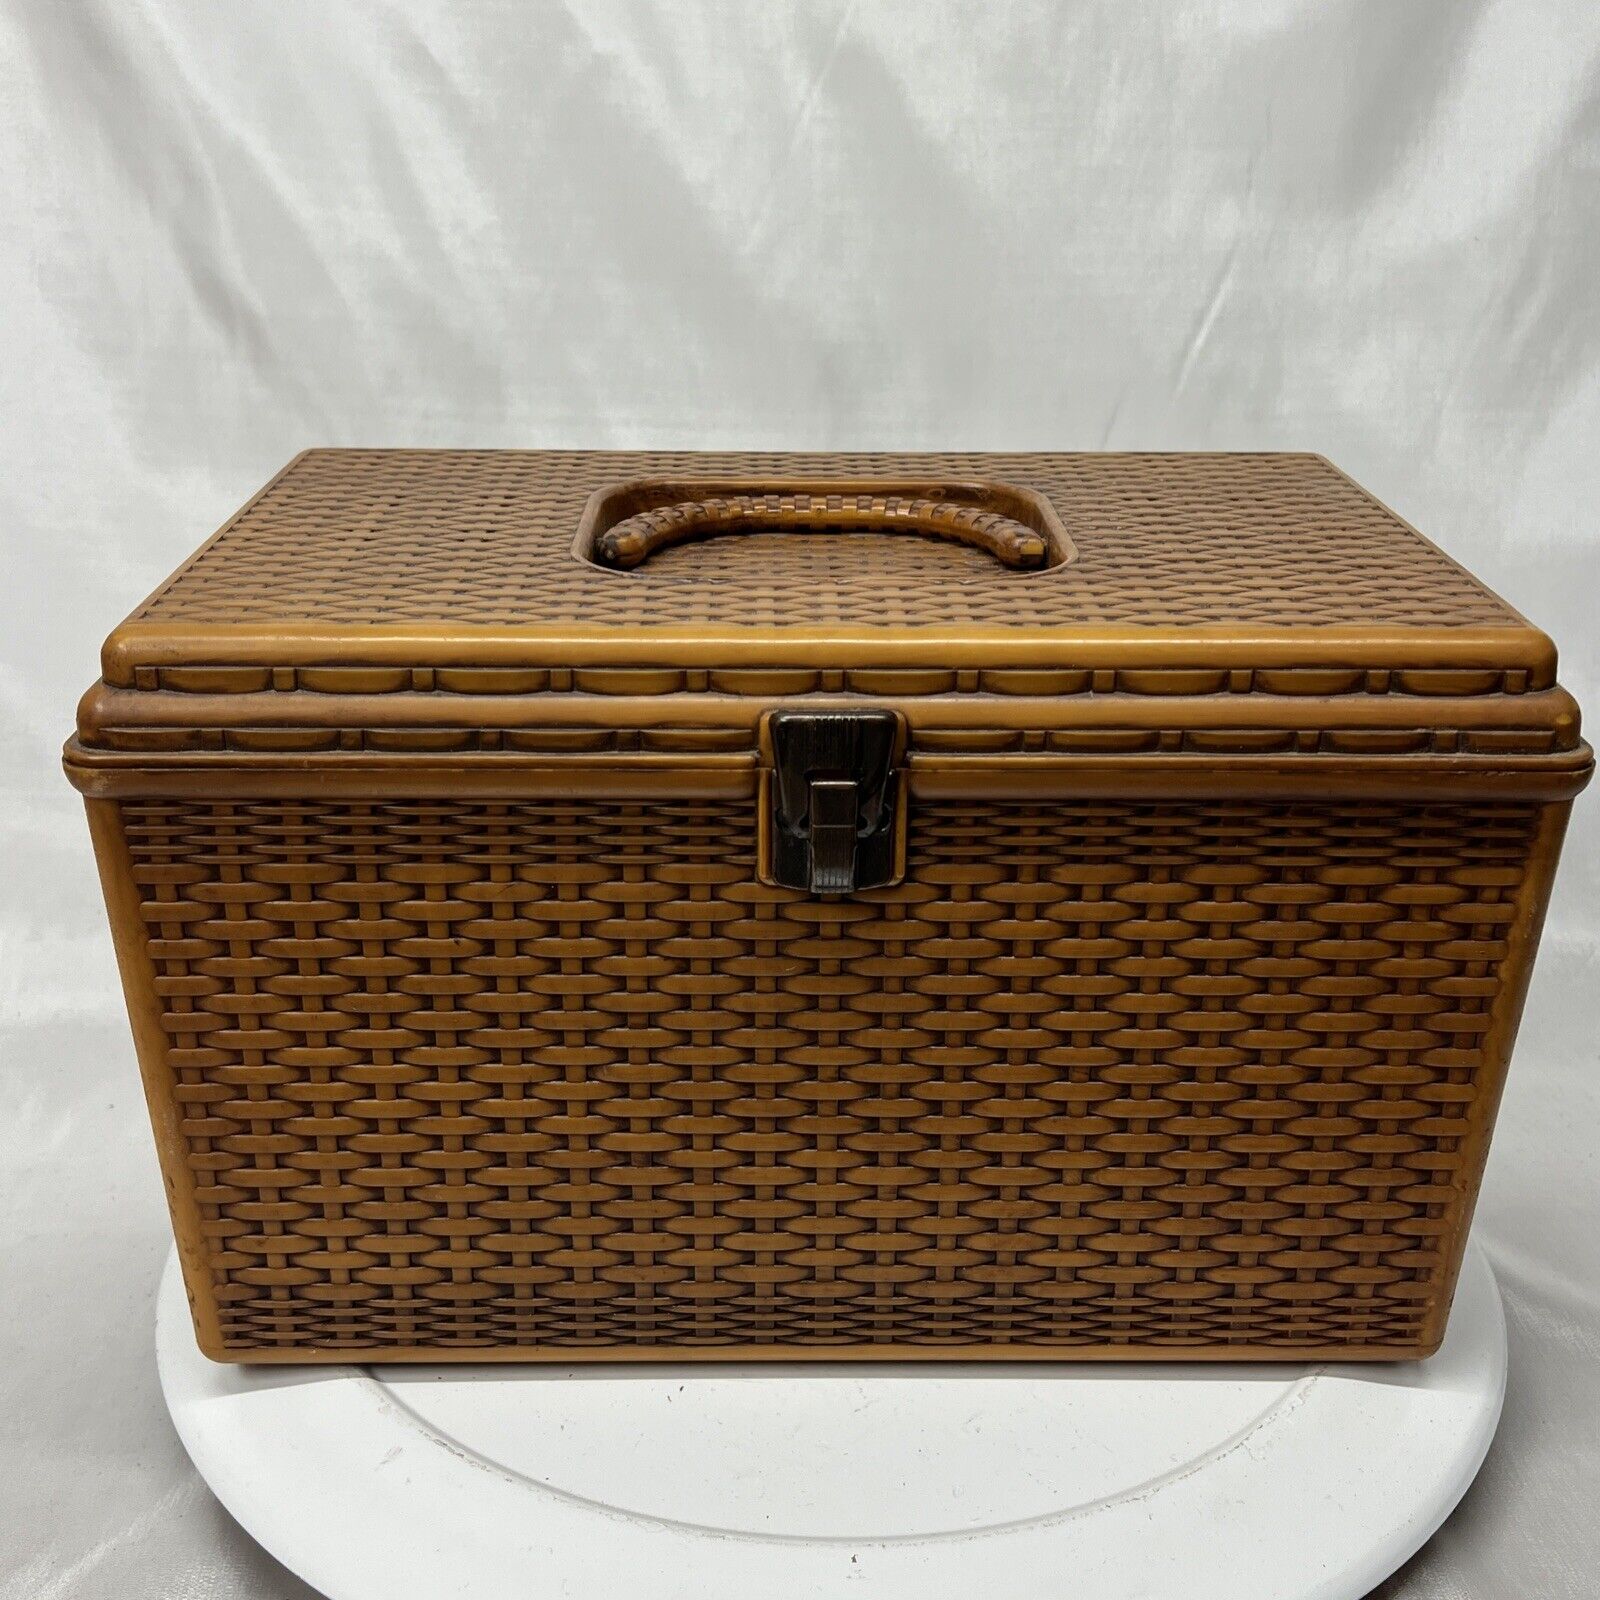 VTG WIL-HOLD Wilson Plastic Sewing Box/2 Trays/Sewing Material - Filled Full